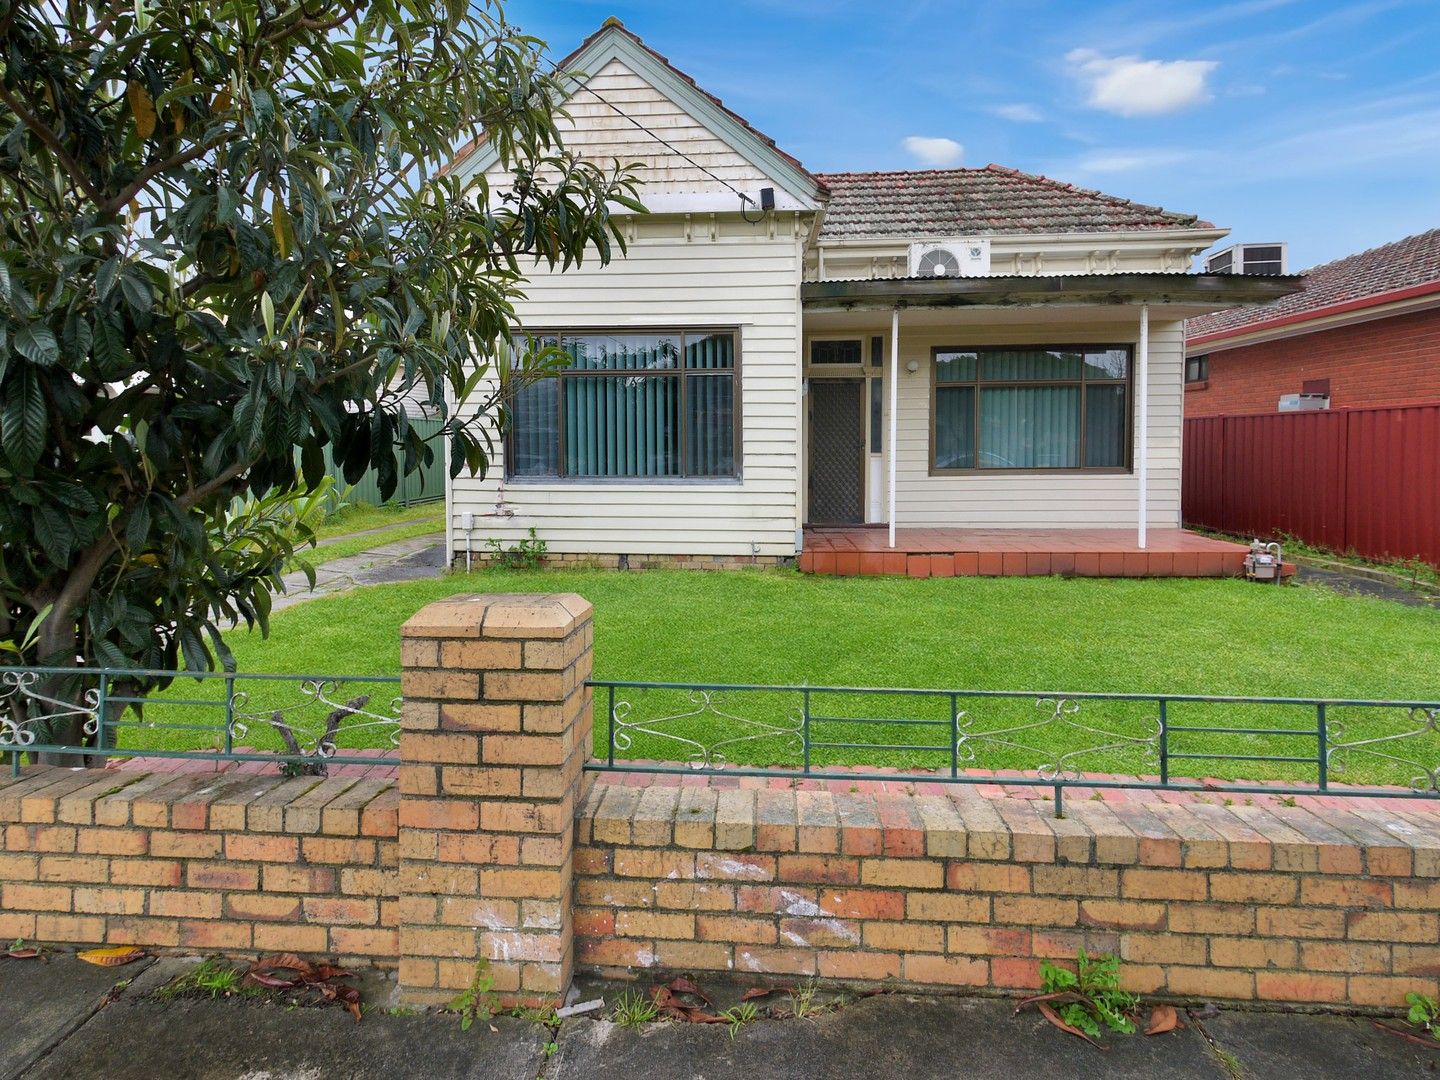 3 bedrooms House in 4 Hall Street COBURG VIC, 3058